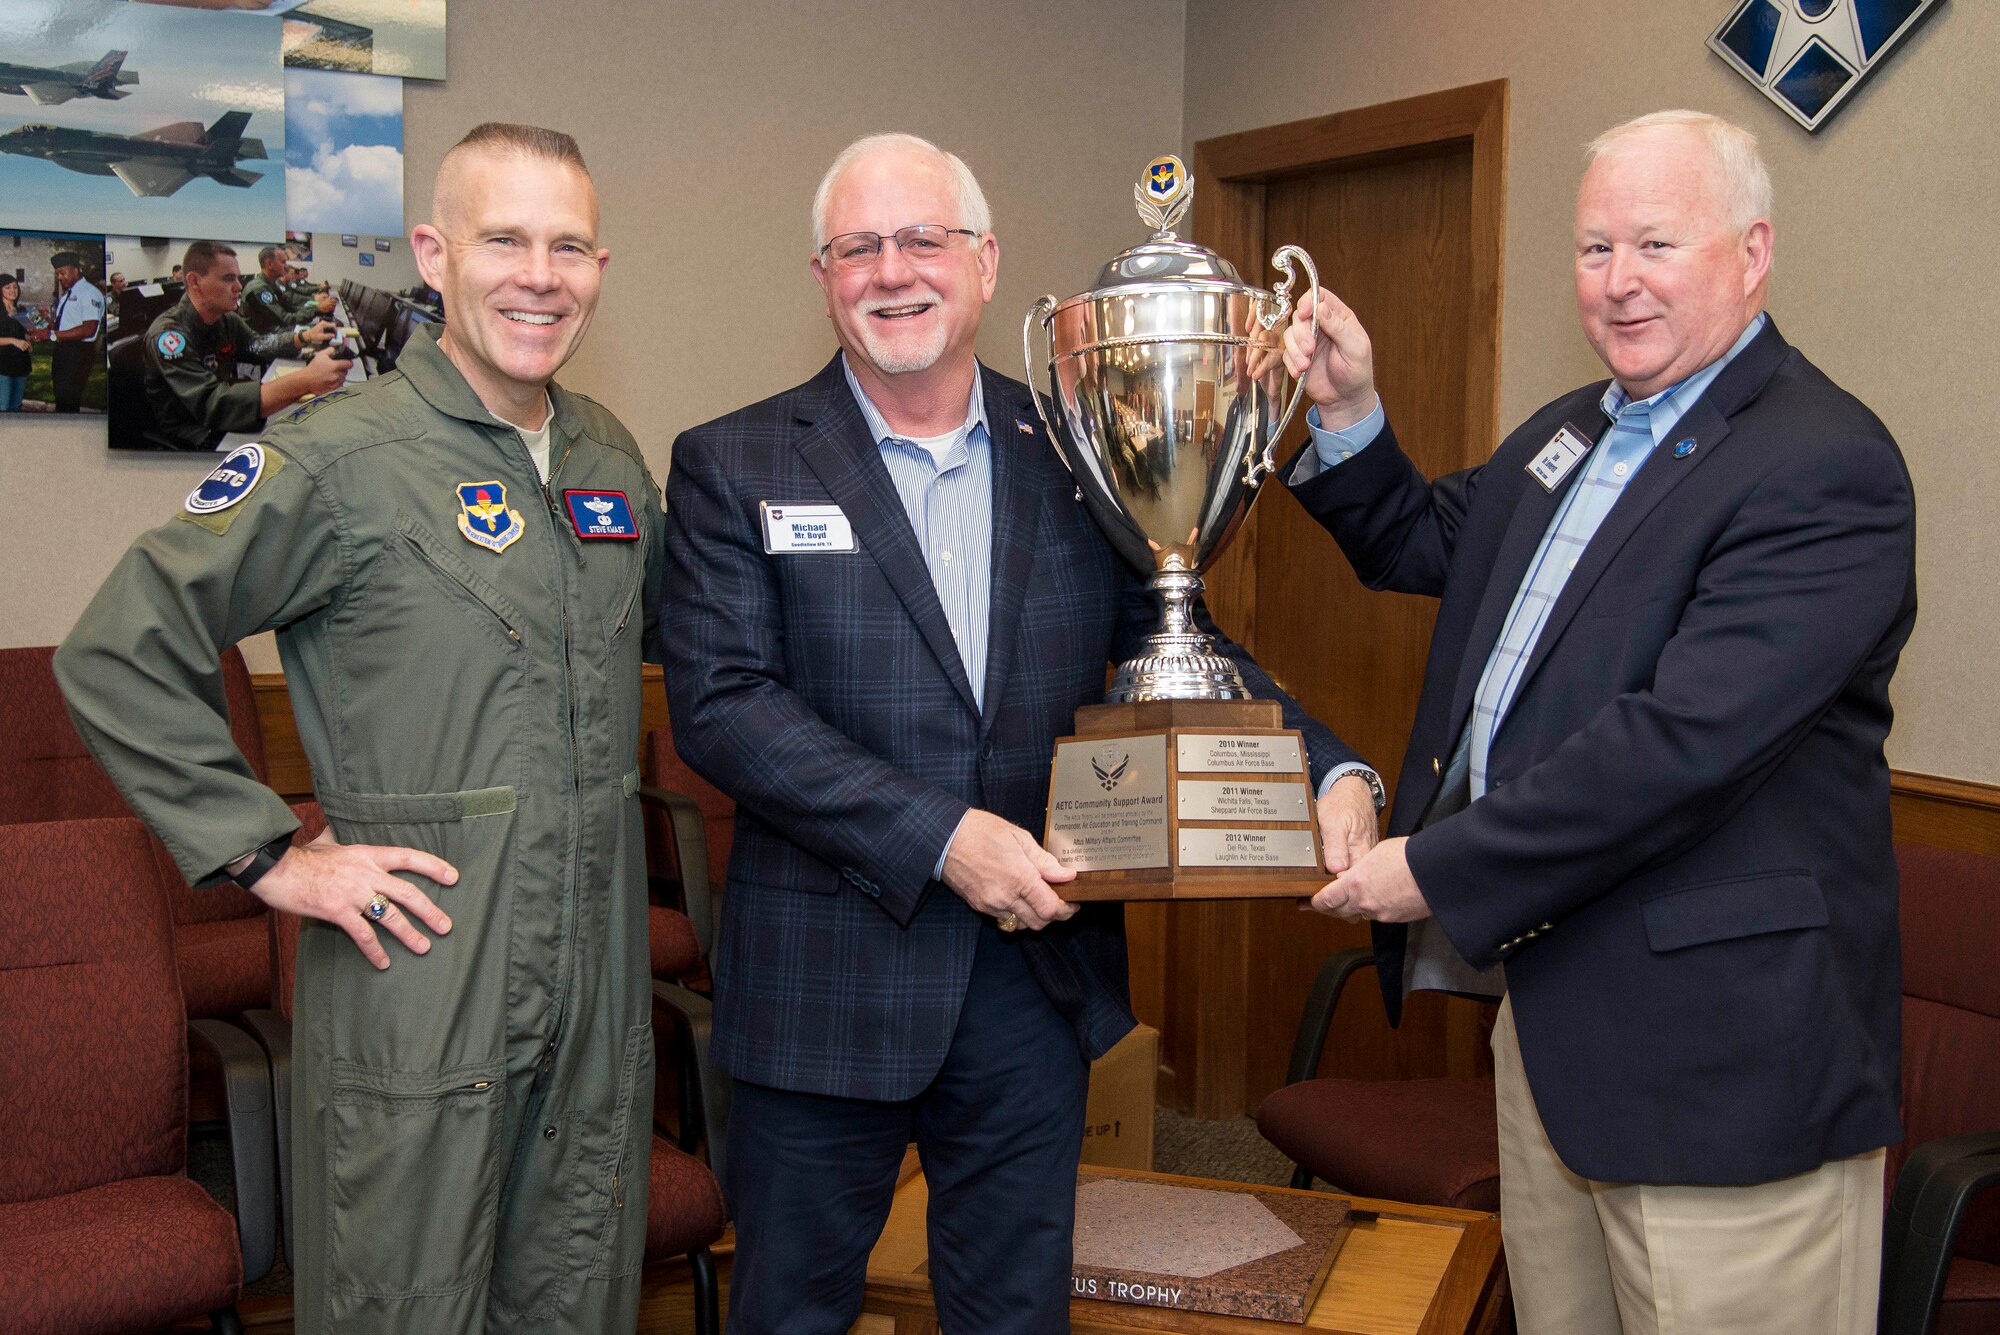 Lt. Gen. Steve Kwast (left), commander of Air Education and Training Command; Mr. Michael Boyd (center), Goodfellow Military Advisory Group member; and Dr. Joe Leverett, Altus Trophy committee chairman, hold up the Altus Trophy during the AETC Civic Leader's meeting Feb. 21, 2019, at Joint Base San Antonio-Randolph, Texas. The city of San Angelo (Texas) was awarded the trophy for 2019 for its outstanding community support to Goodfellow Air Force Base, Texas.